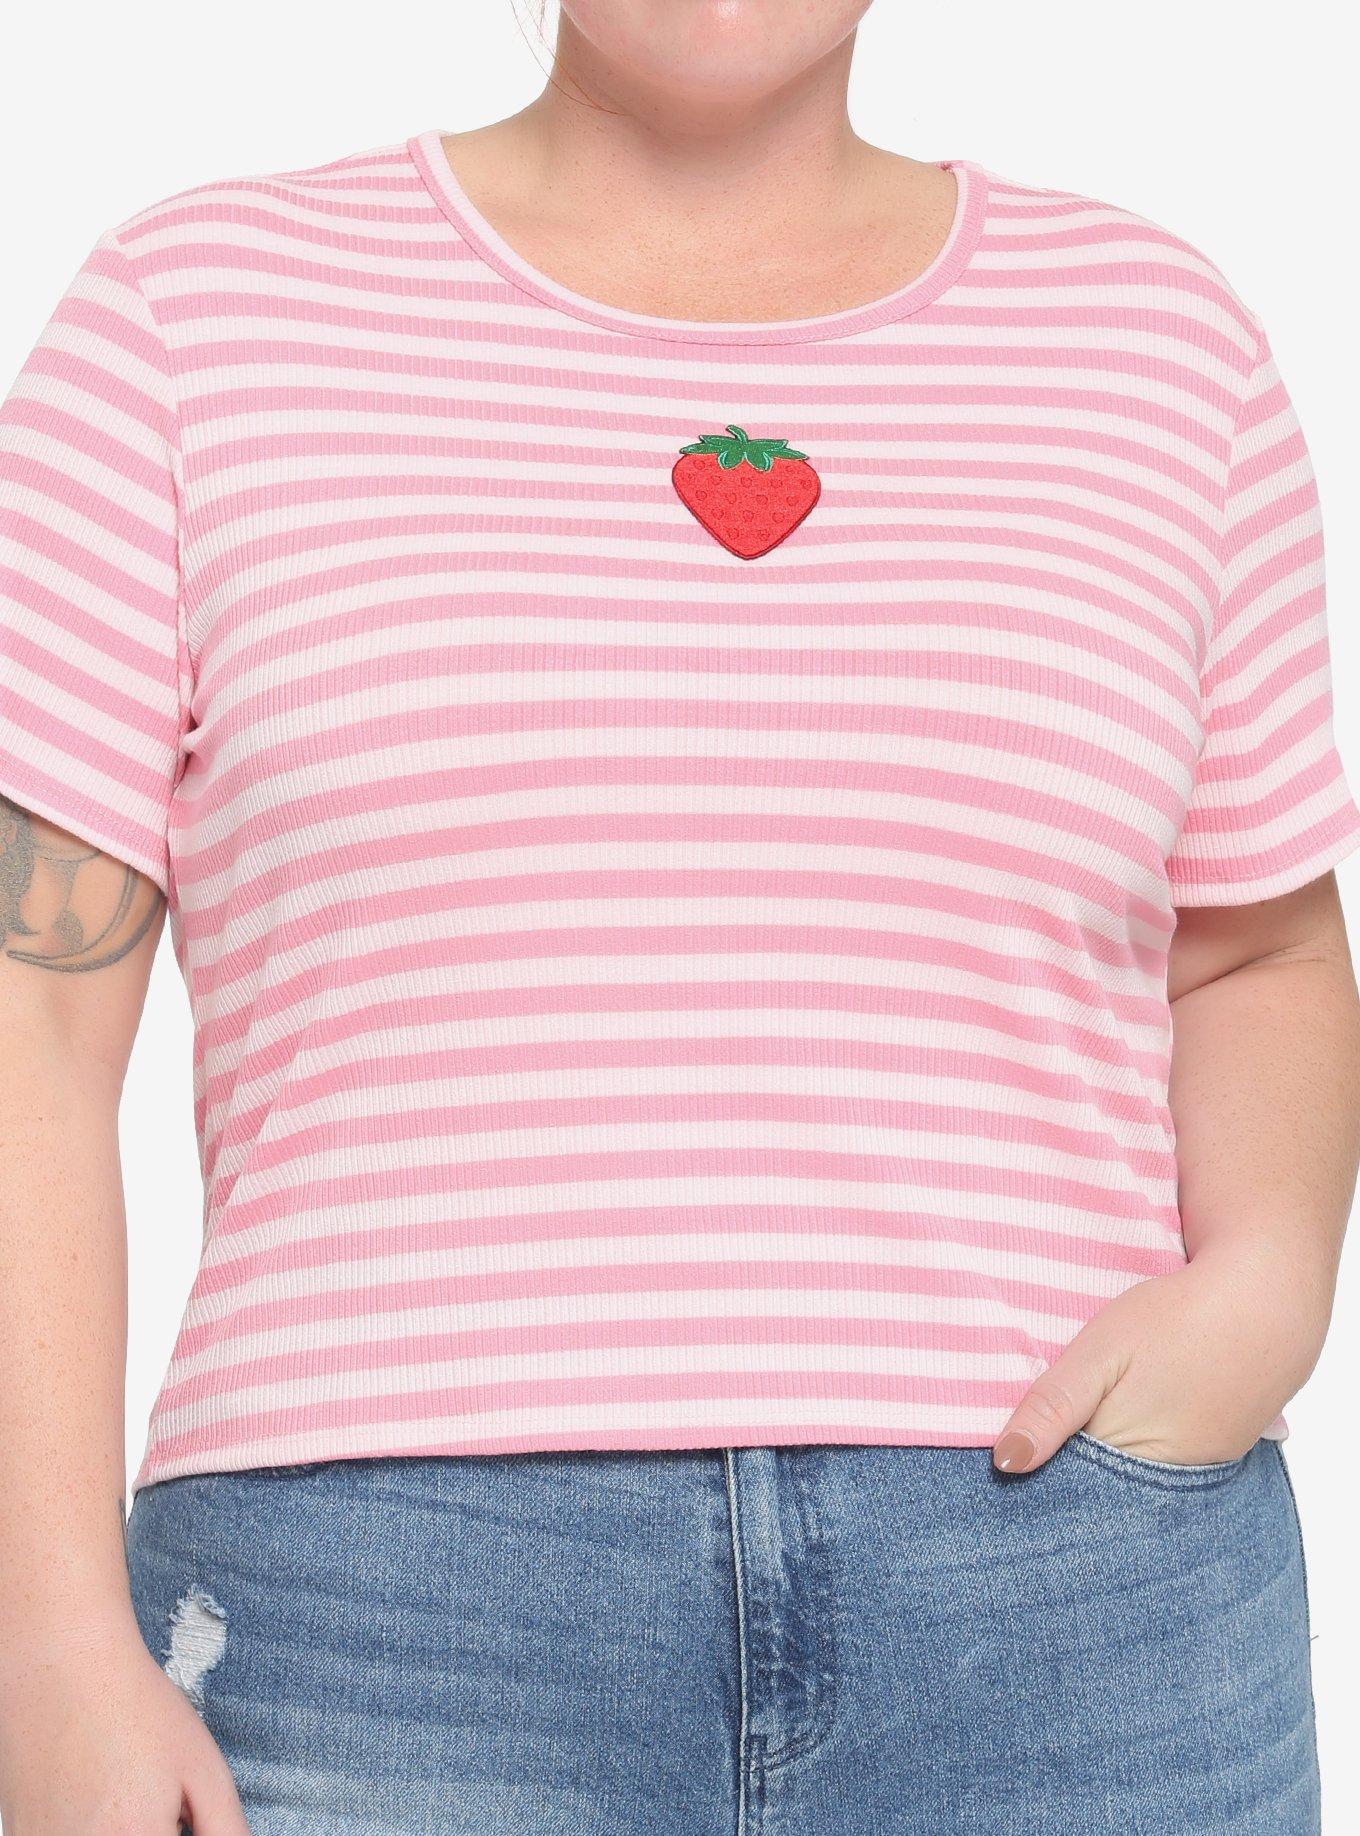 Embroidered Strawberry Stripe Girls Baby T-Shirt Plus Size, STRIPES - RED, hi-res